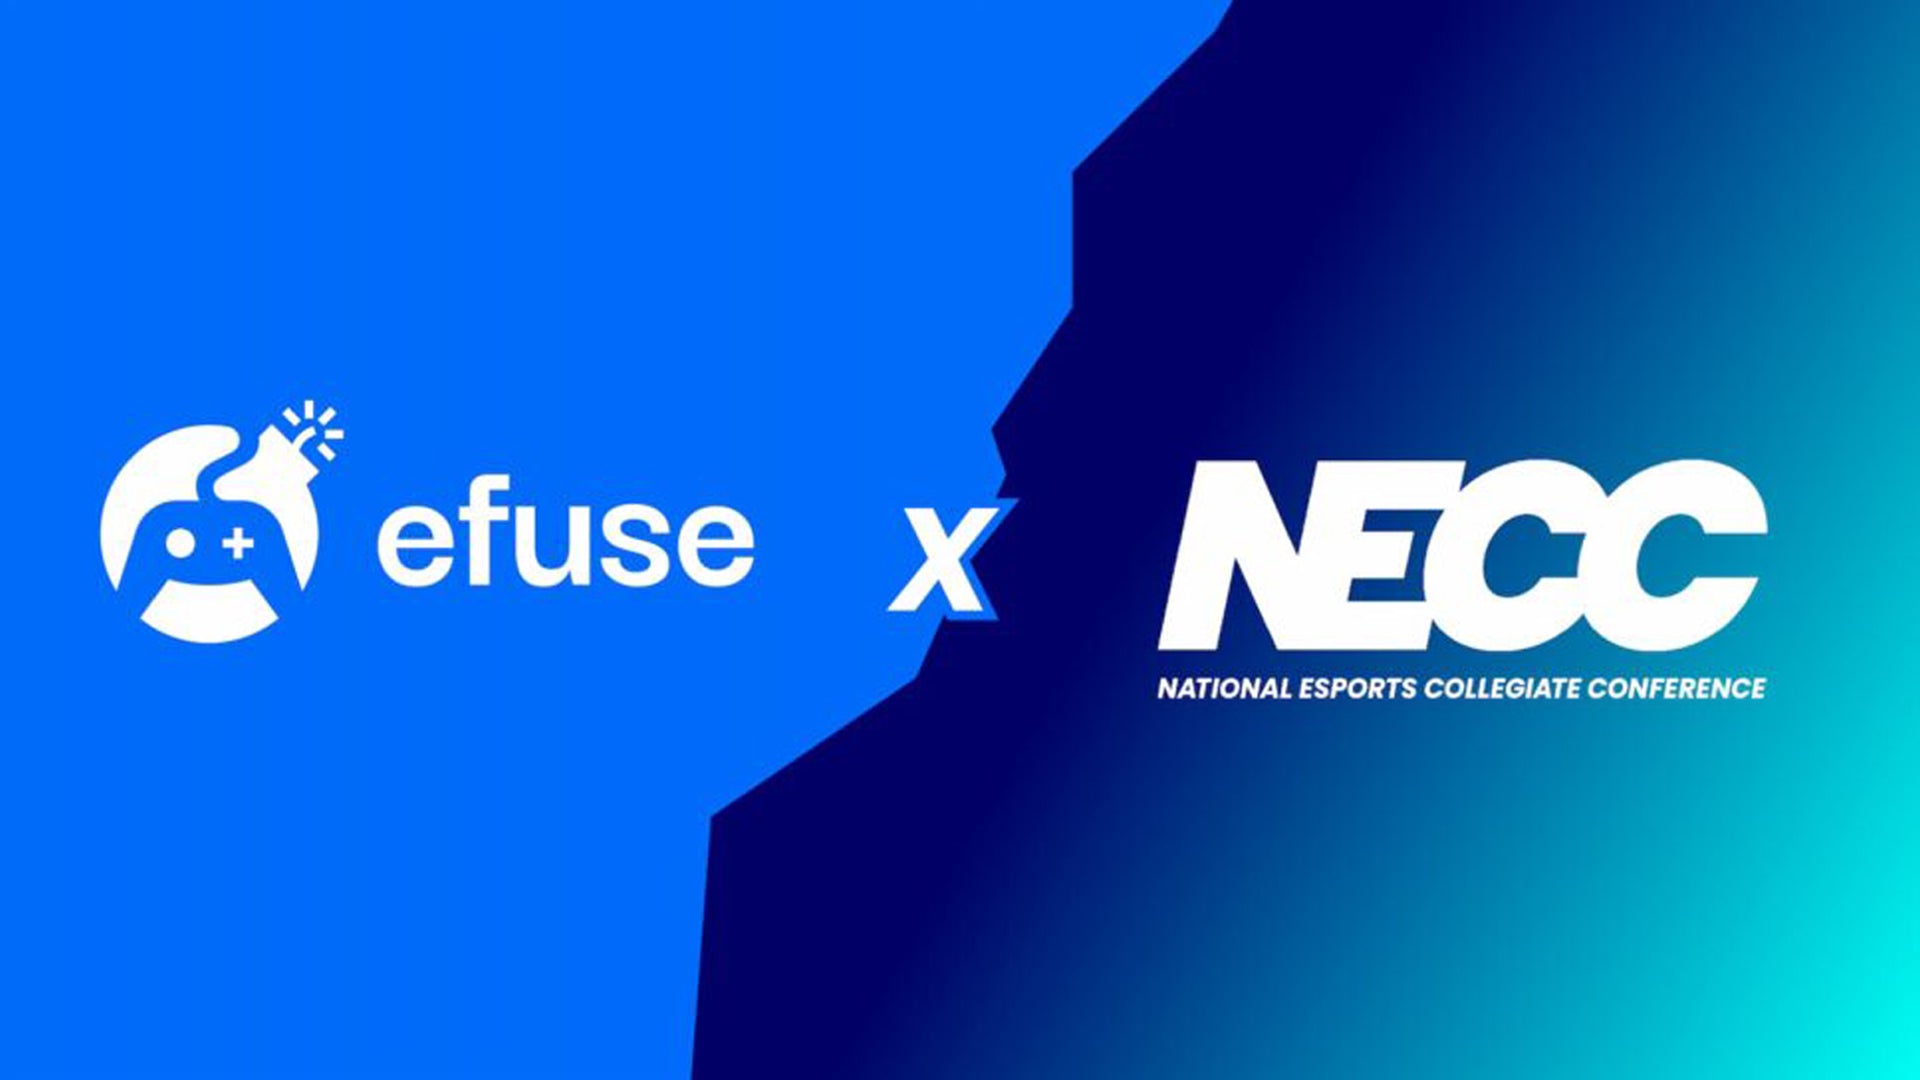 NECC Announces Strategic Partnership with efuse to Provide More Opportunities for Collegiate Esports Community